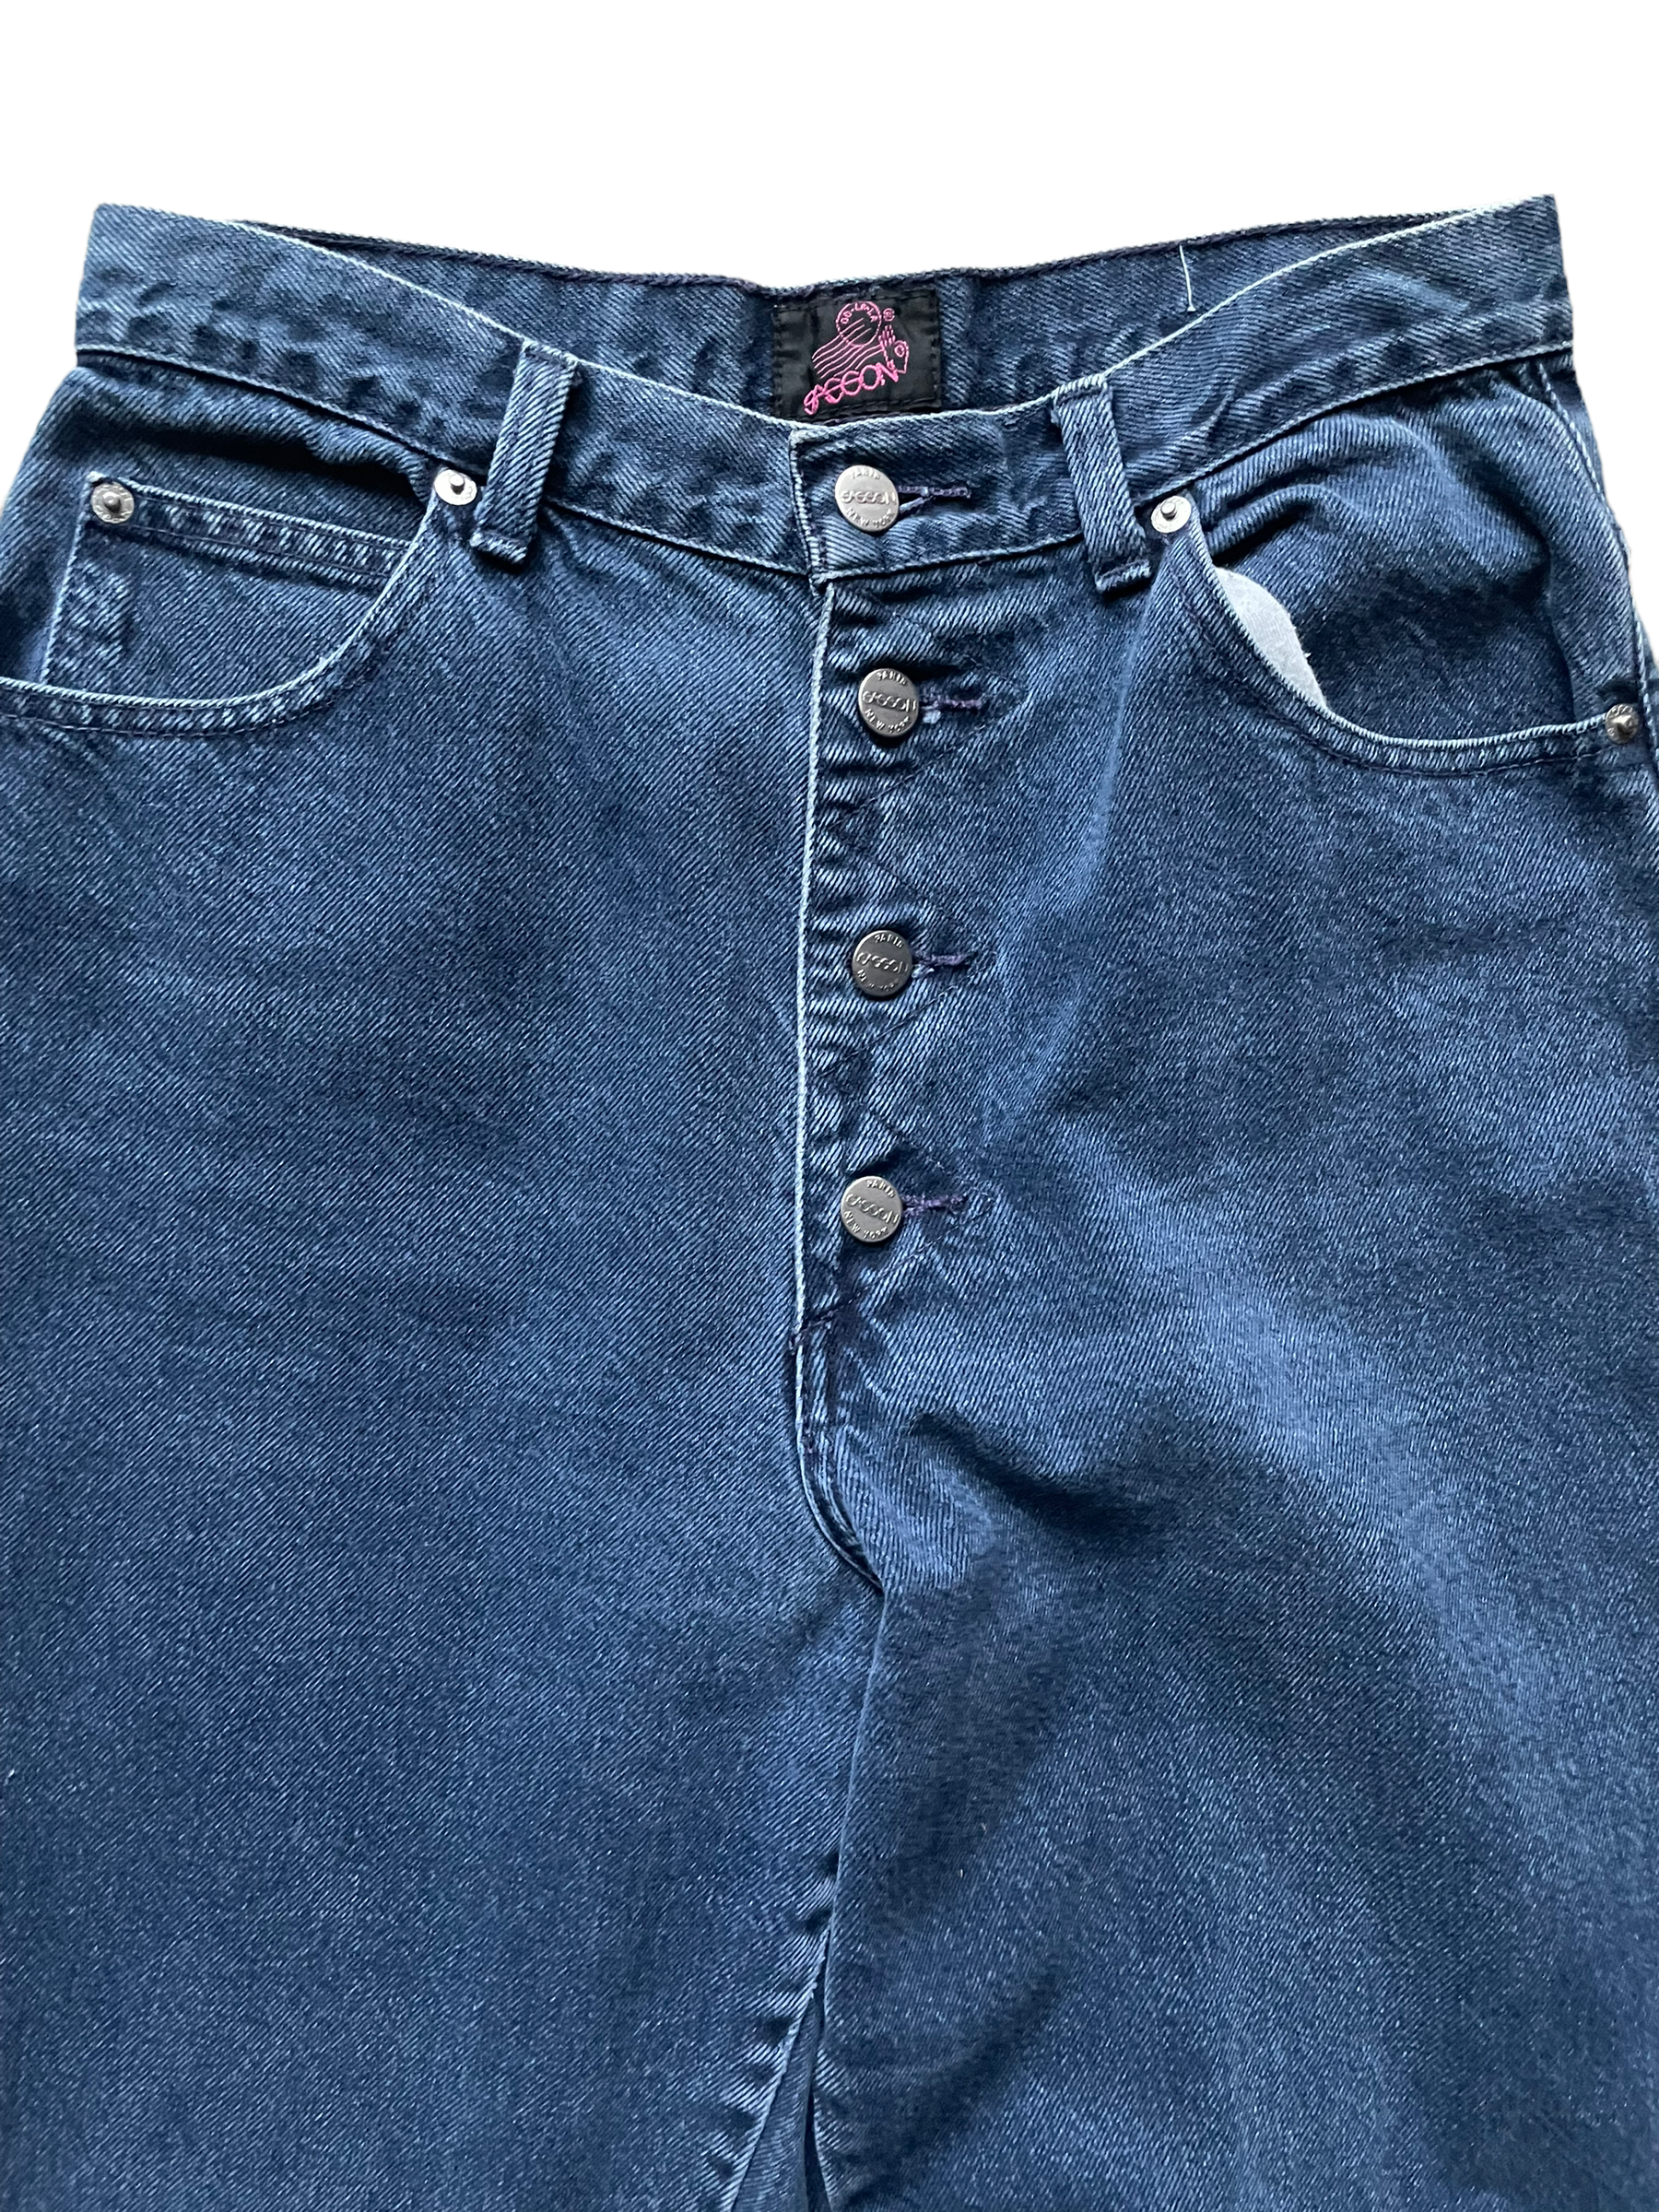 Front waist view of Vintage 1980s Sasson Ladies Jeans | Barn Owl Seattle | Vintage Ladies Jeans and Pants